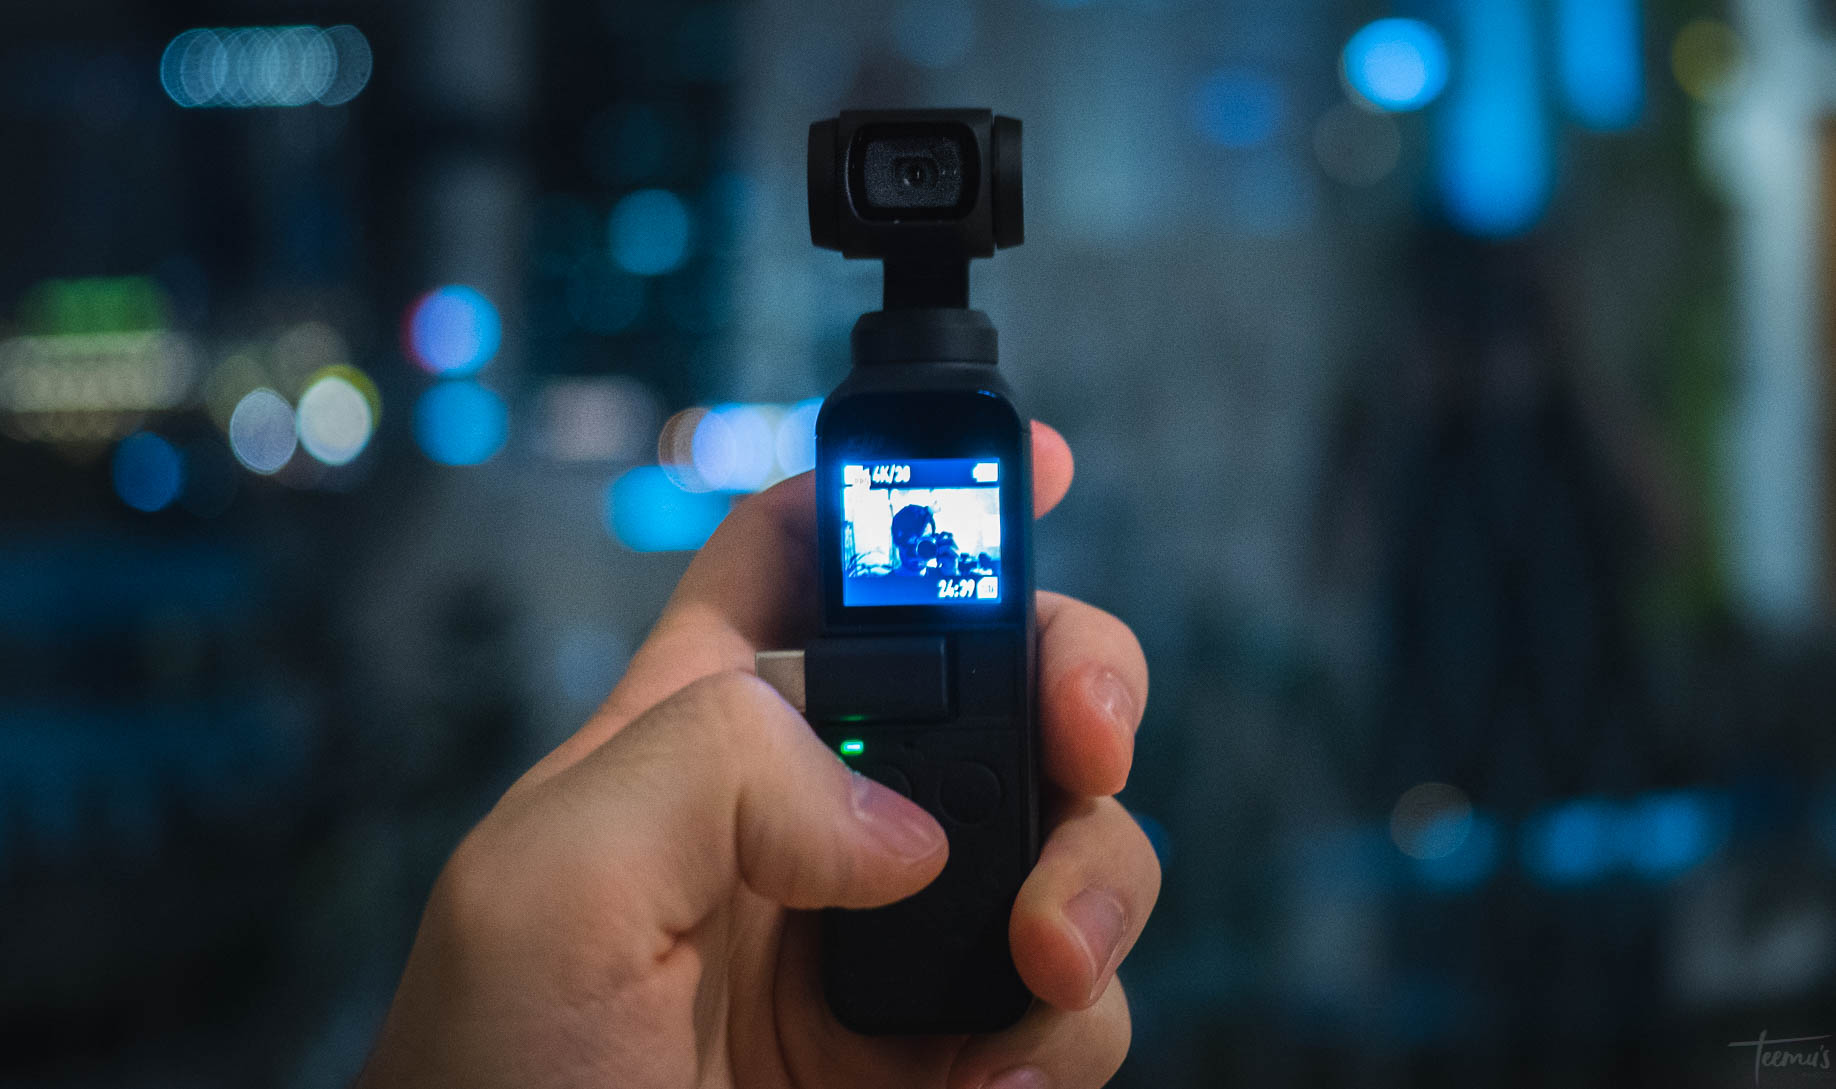 Osmo Pocket In-Depth Review: The World in Your Hands - DJI Guides